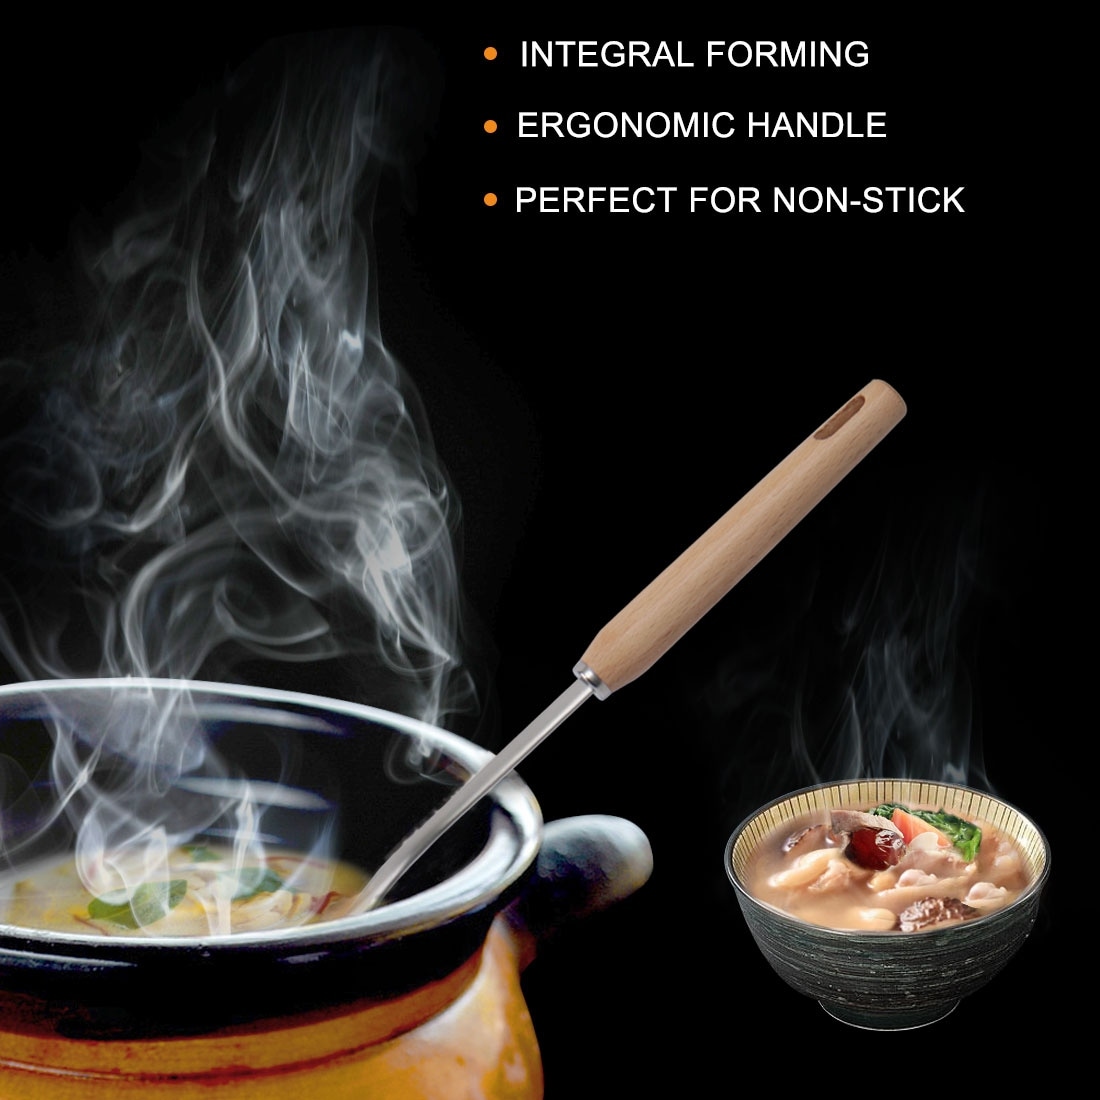 https://ak1.ostkcdn.com/images/products/is/images/direct/811e39f13f54448c4fd0f5da141c23c779711a36/Stainless-Steel-Soup-Ladle-Spoon-Wooden-Handle-Cookware-Utensil.jpg